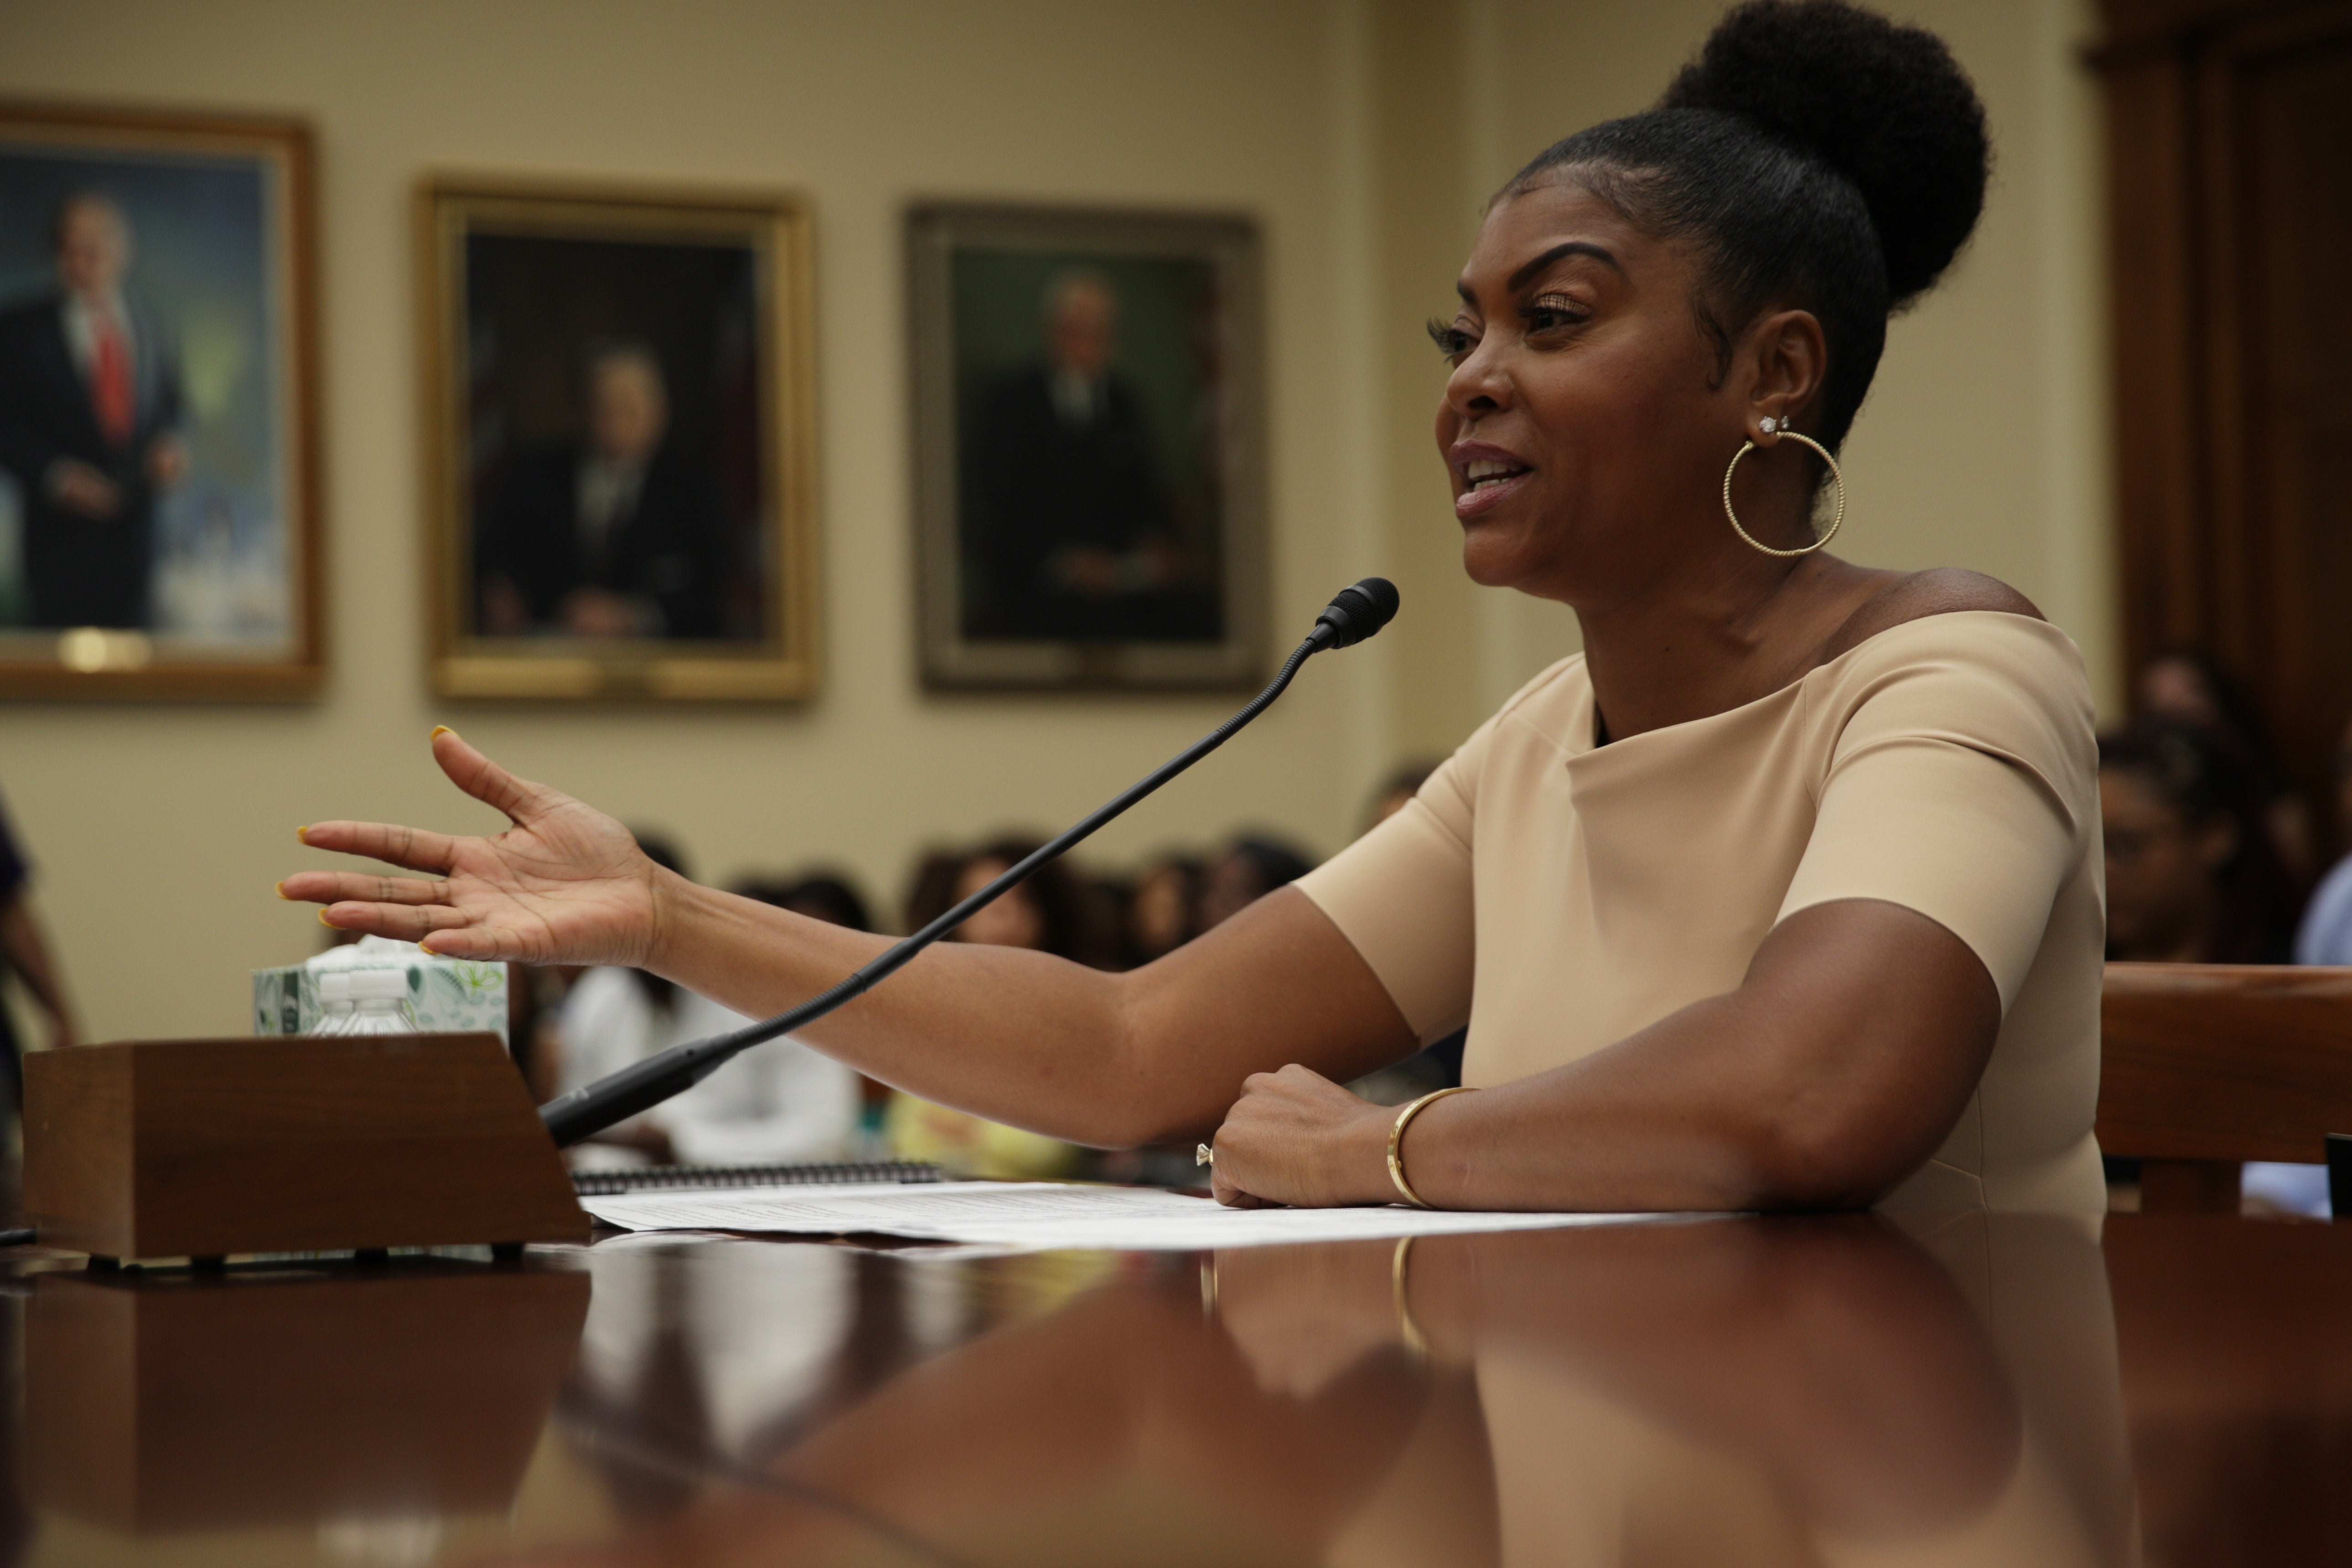 Taraji P. Henson Gives An Emotional Testimony To Congress On Mental Health Among Black Youth: 'This Is A National Crisis'